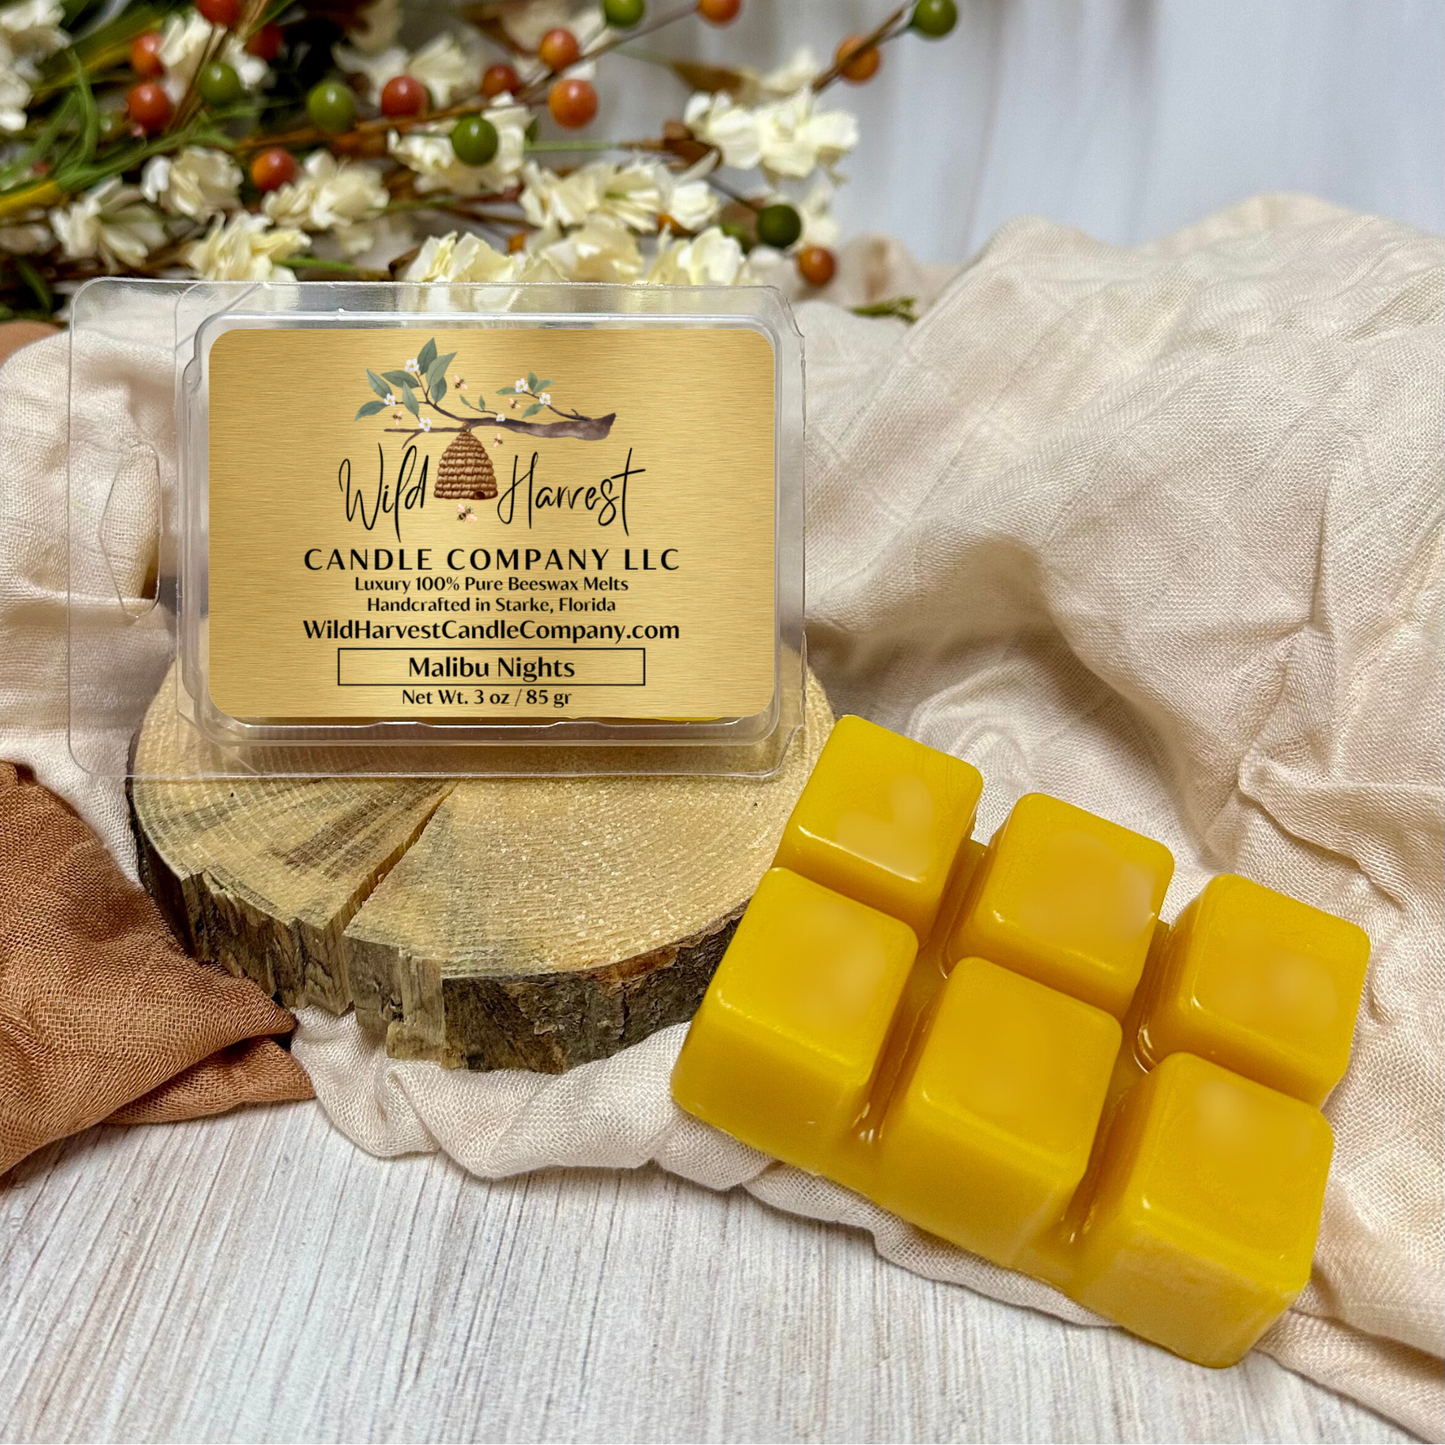 Malibu Nights Scented - Pure Beeswax Melts (1-Pack)